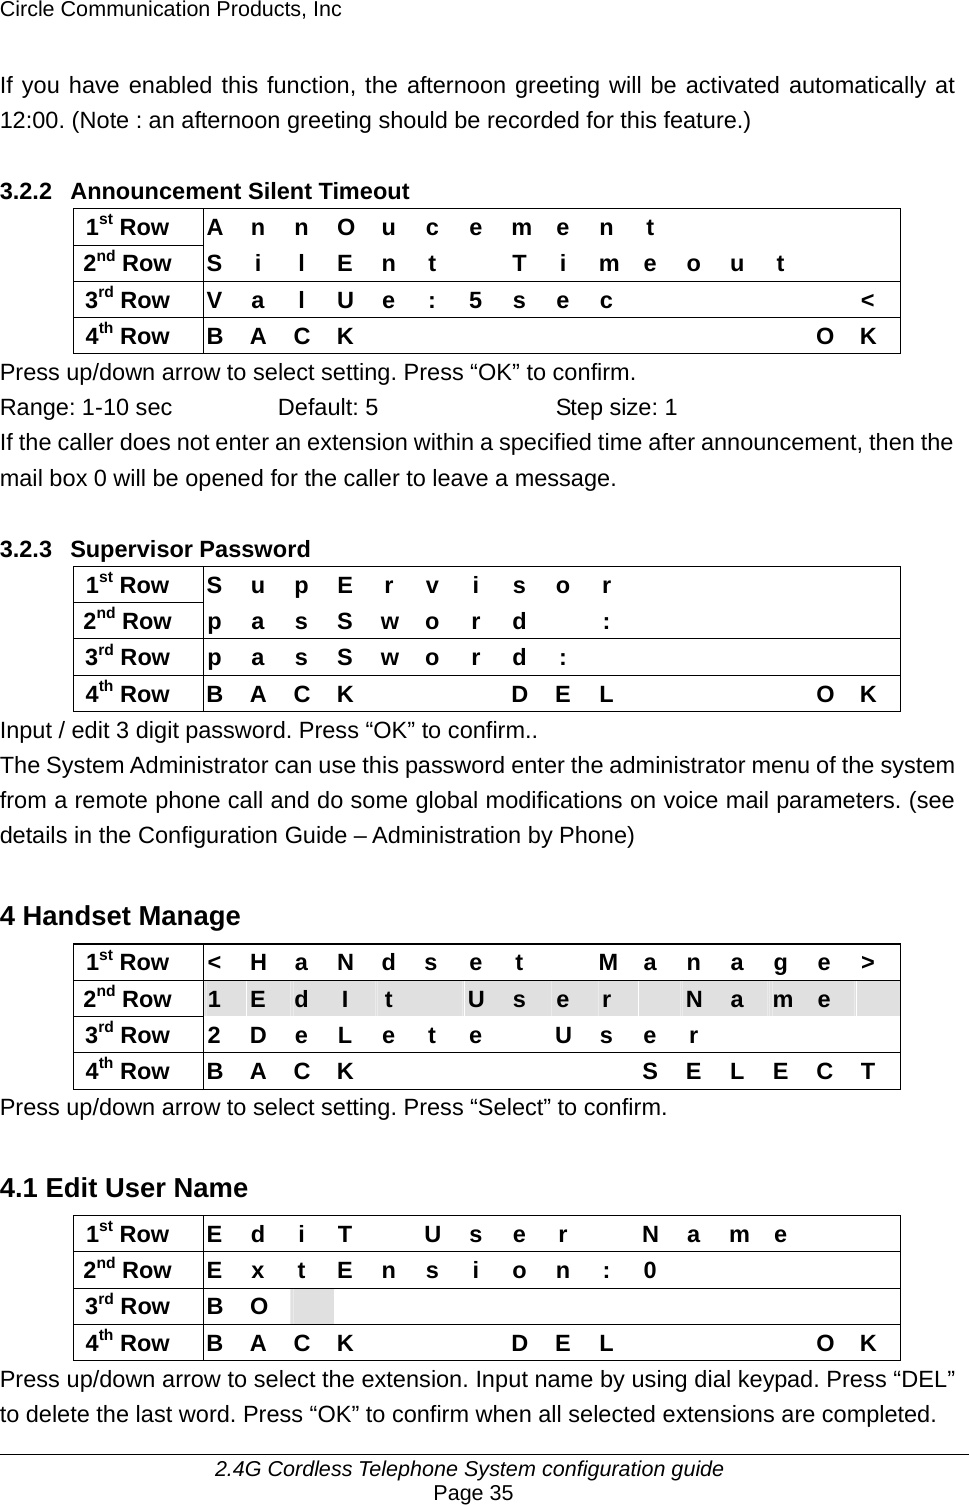 Circle Communication Products, Inc     2.4G Cordless Telephone System configuration guide Page 35 If you have enabled this function, the afternoon greeting will be activated automatically at 12:00. (Note : an afternoon greeting should be recorded for this feature.)  3.2.2  Announcement Silent Timeout 1st Row  A n n O u c e m e n t           2nd Row S i  l E n t    T i m e o u t     3rd Row  V a l U e : 5 s e c            &lt; 4th Row B A C K           O K Press up/down arrow to select setting. Press “OK” to confirm. Range: 1-10 sec  Default: 5  Step size: 1 If the caller does not enter an extension within a specified time after announcement, then the mail box 0 will be opened for the caller to leave a message.  3.2.3 Supervisor Password 1st Row S u p E r v i s o r             2nd Row p a s S w o r d  :           3rd Row p a s S w o r d :        4th Row  B A C K        D E L          O K Input / edit 3 digit password. Press “OK” to confirm.. The System Administrator can use this password enter the administrator menu of the system from a remote phone call and do some global modifications on voice mail parameters. (see details in the Configuration Guide – Administration by Phone)  4 Handset Manage 1st Row  &lt; H a N d s e t    M a n a g e &gt; 2nd Row  1  E  d  I  t   U  s  e  r   N  a  m  e   3rd Row  2 D e L e  t  e    U s e  r         4th Row B A C K       S E L E C T Press up/down arrow to select setting. Press “Select” to confirm.  4.1 Edit User Name 1st Row E d i T  U s e r   N a m e    2nd Row  E x t E n s  i  o n : 0           3rd Row  B  O                4th Row  B A C K        D E L          O K Press up/down arrow to select the extension. Input name by using dial keypad. Press “DEL” to delete the last word. Press “OK” to confirm when all selected extensions are completed. 